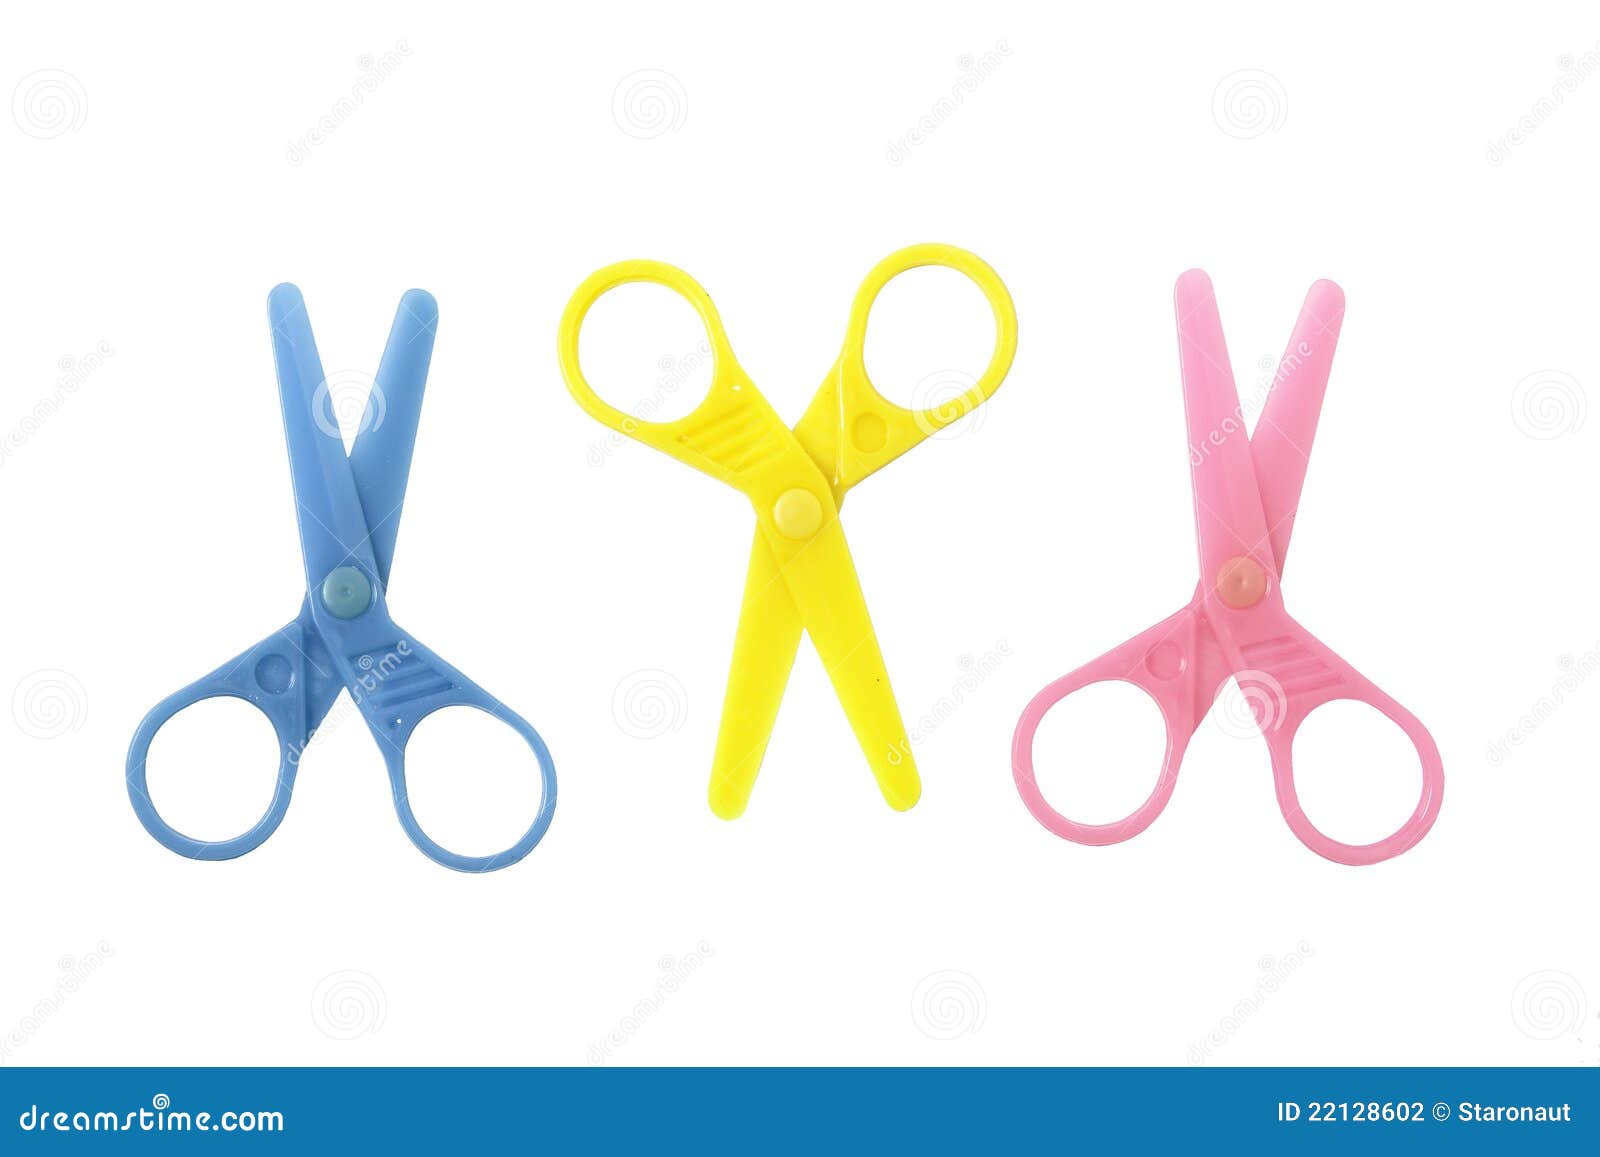 6,800+ Kids Scissors Isolated Stock Photos, Pictures & Royalty